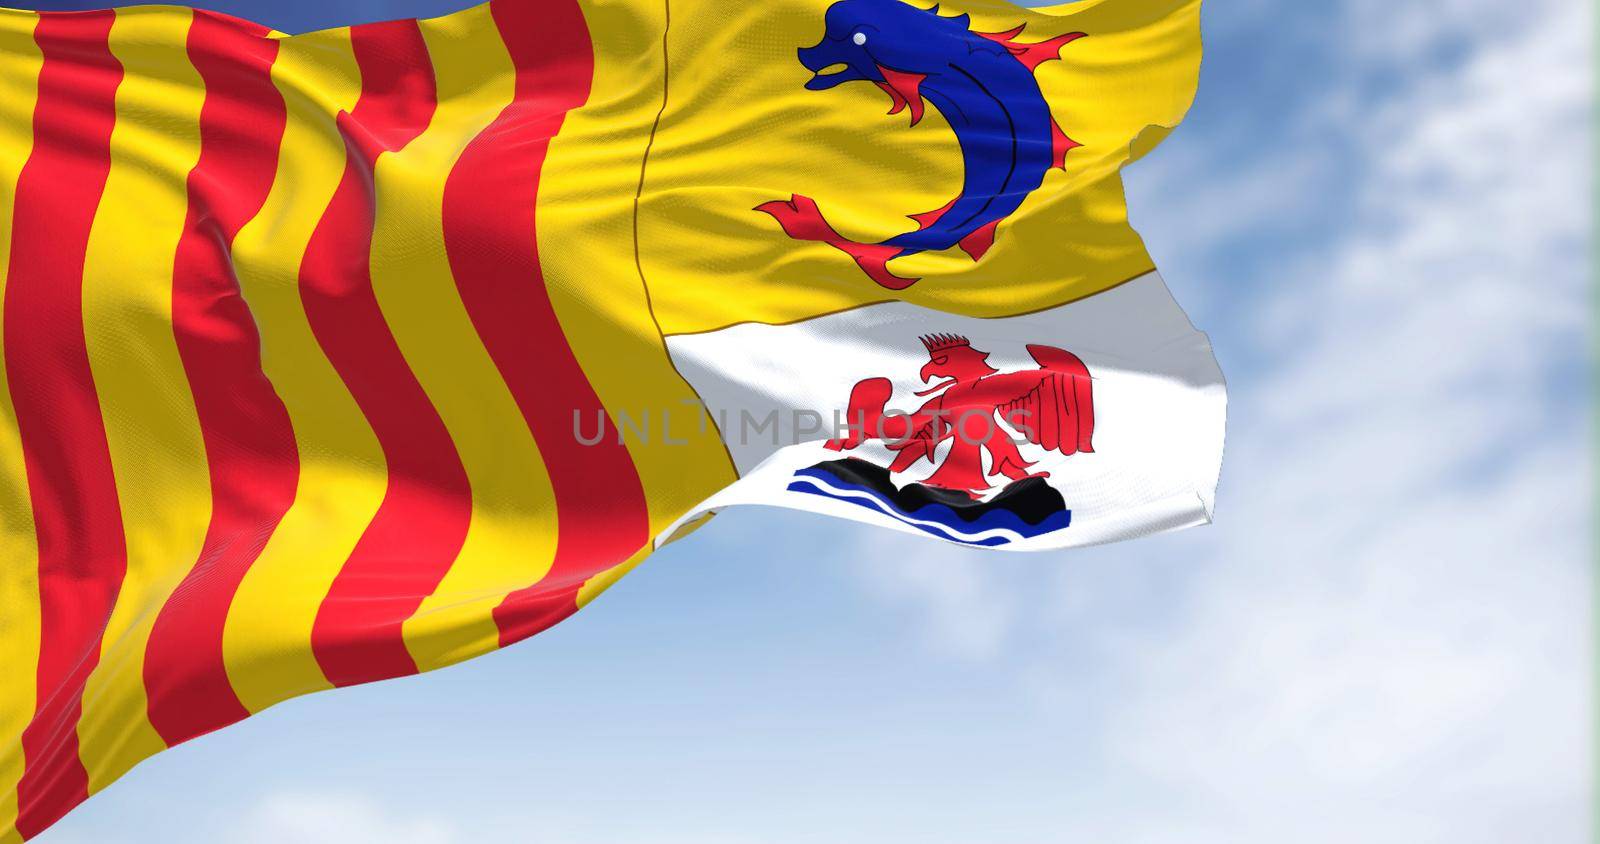 The region flag of Provence-Alpes-Côte d'Azur waving in the wind on a clear day. Provence-Alpes-Côte d'Azur is one of the eighteen administrative regions of France